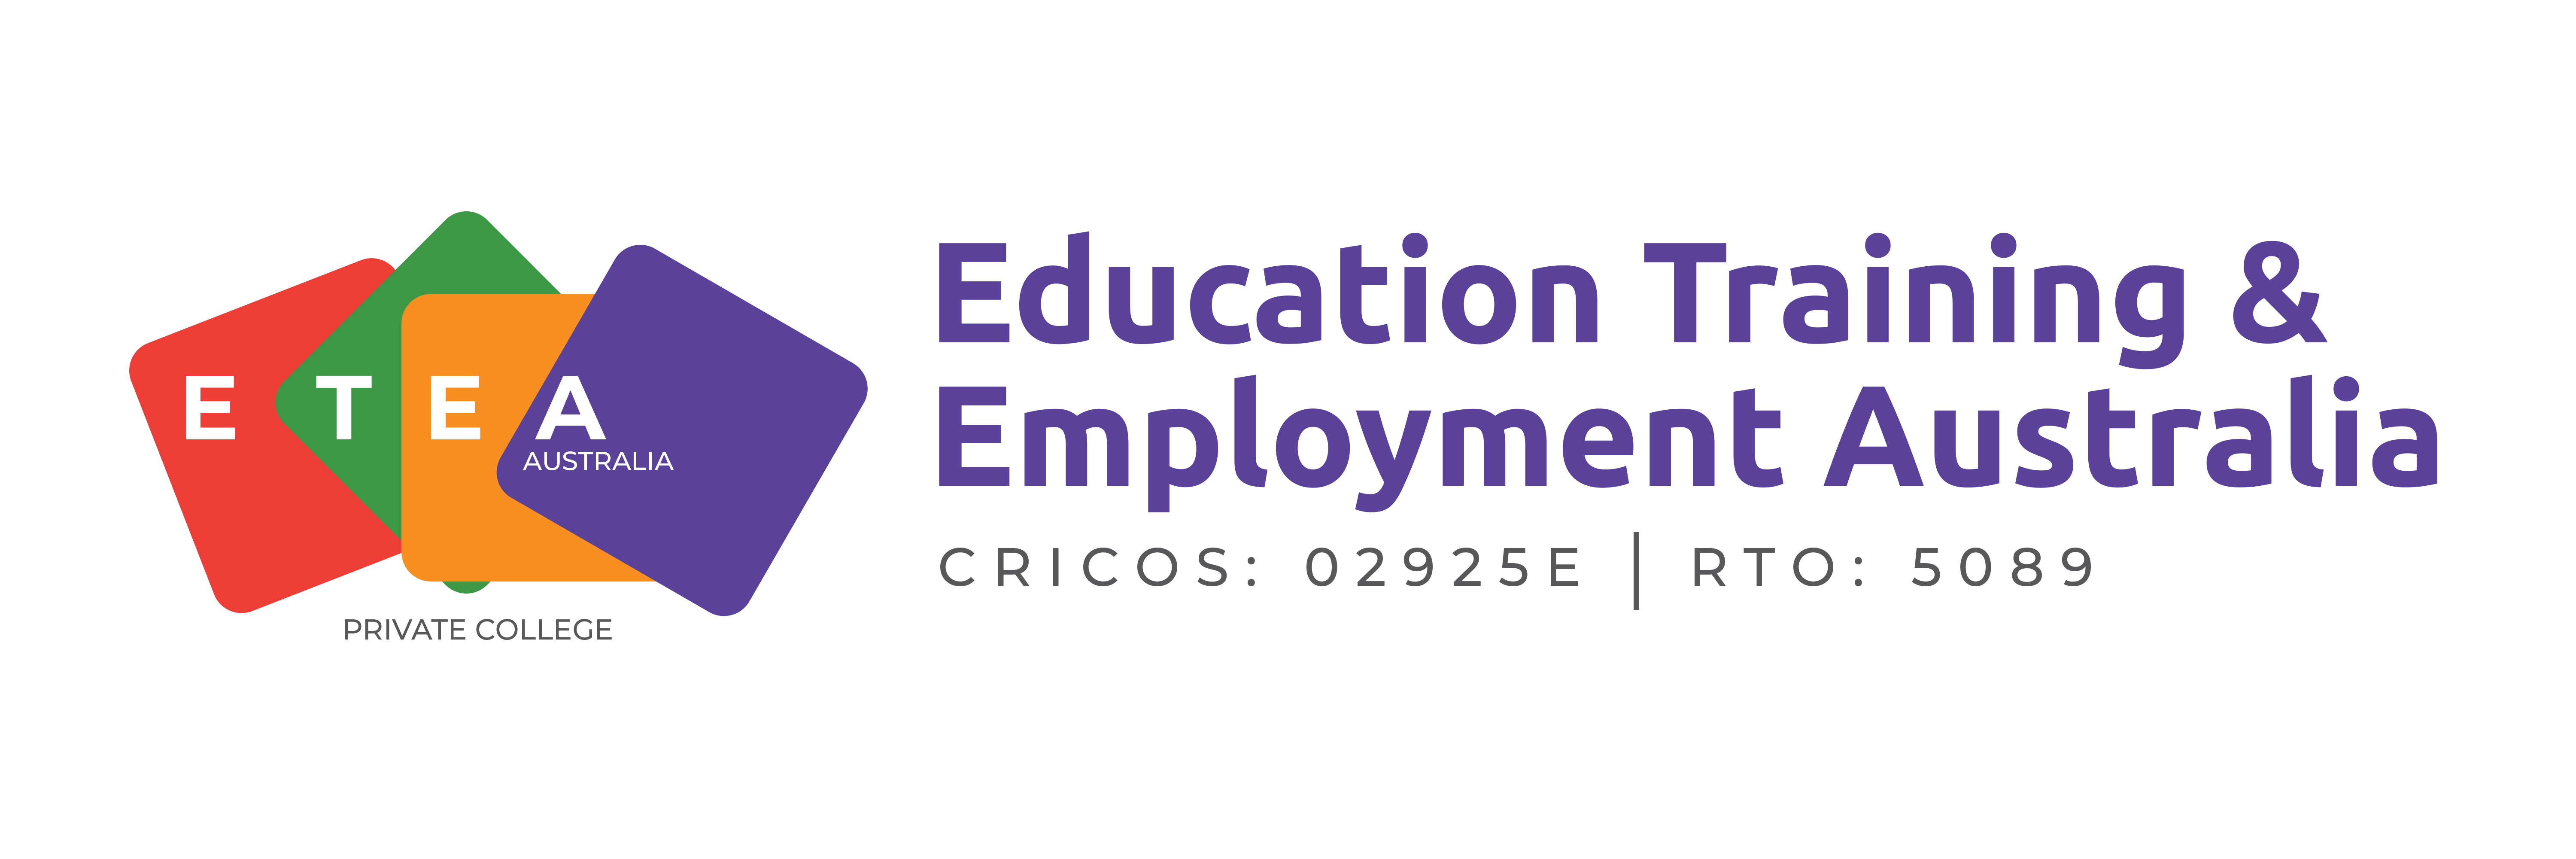 Posts Archives - Education Training and Employment Australia